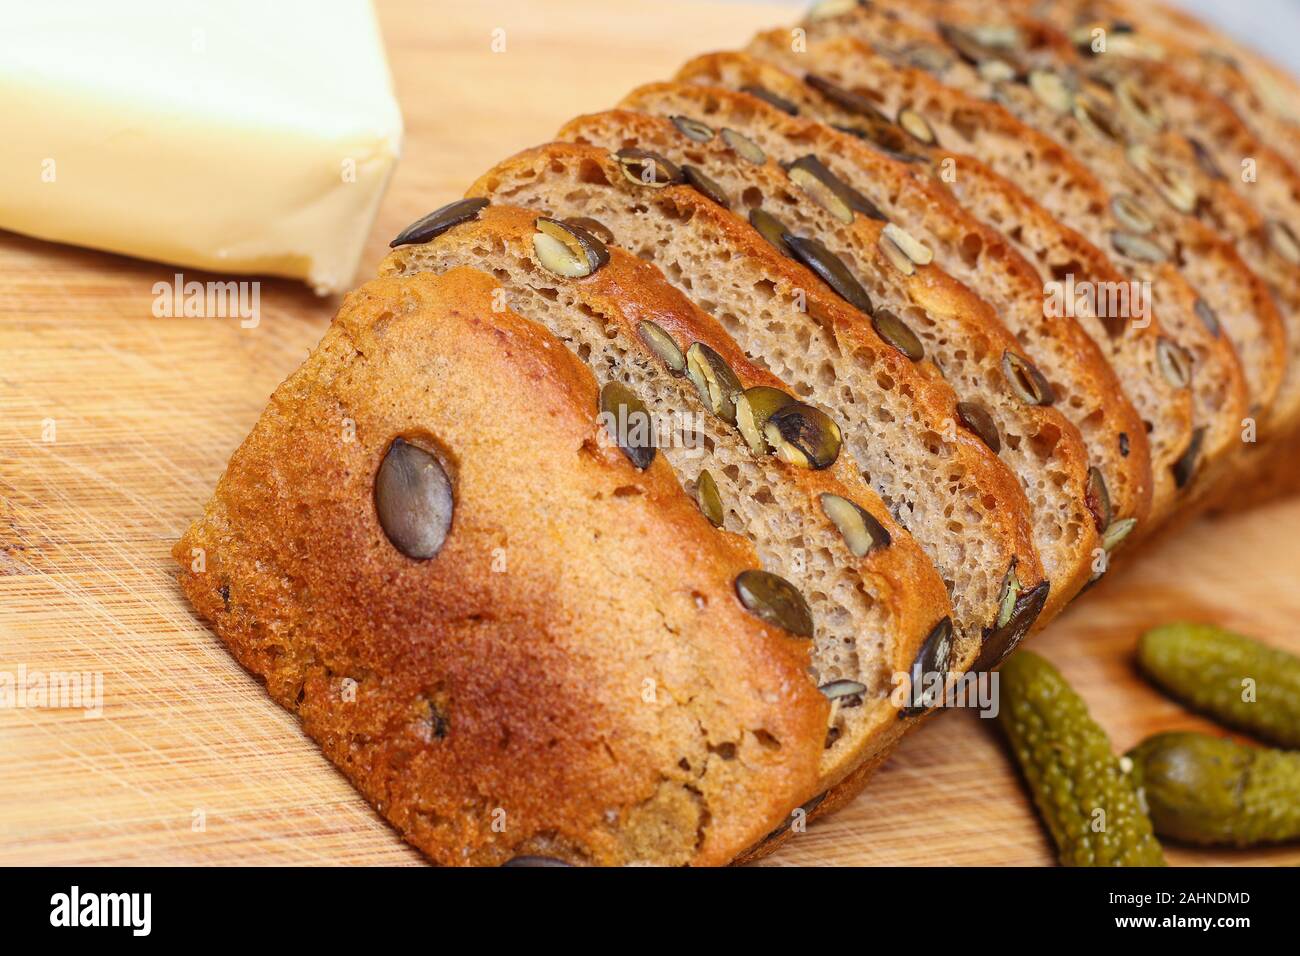 Pre-sliced rye and wheat bread with pumpkin seeds on kitchen board Stock Photo